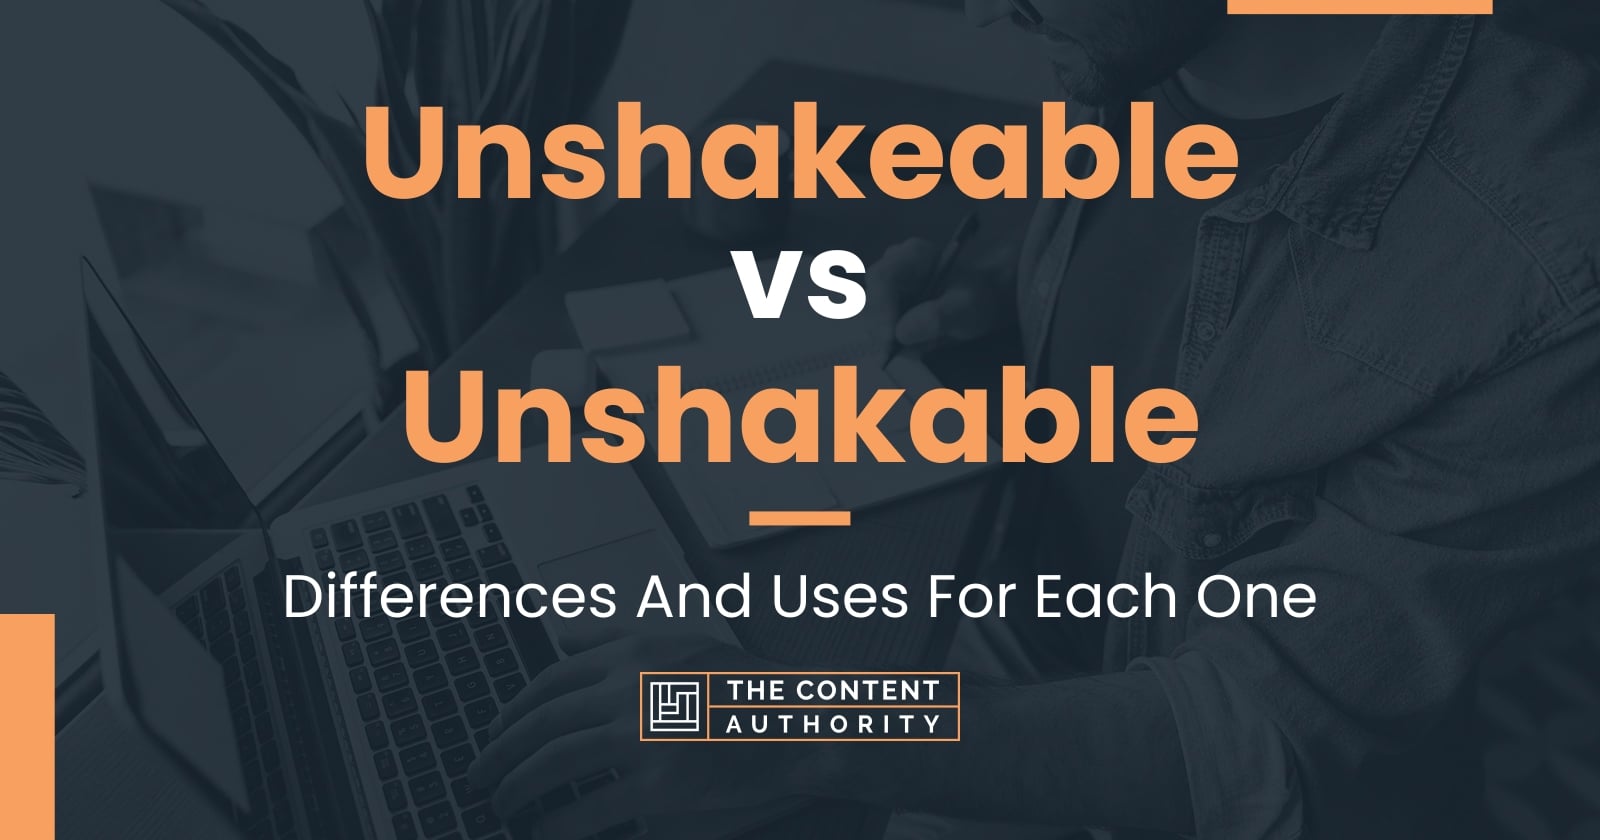 Unshakeable vs Unshakable: Differences And Uses For Each One